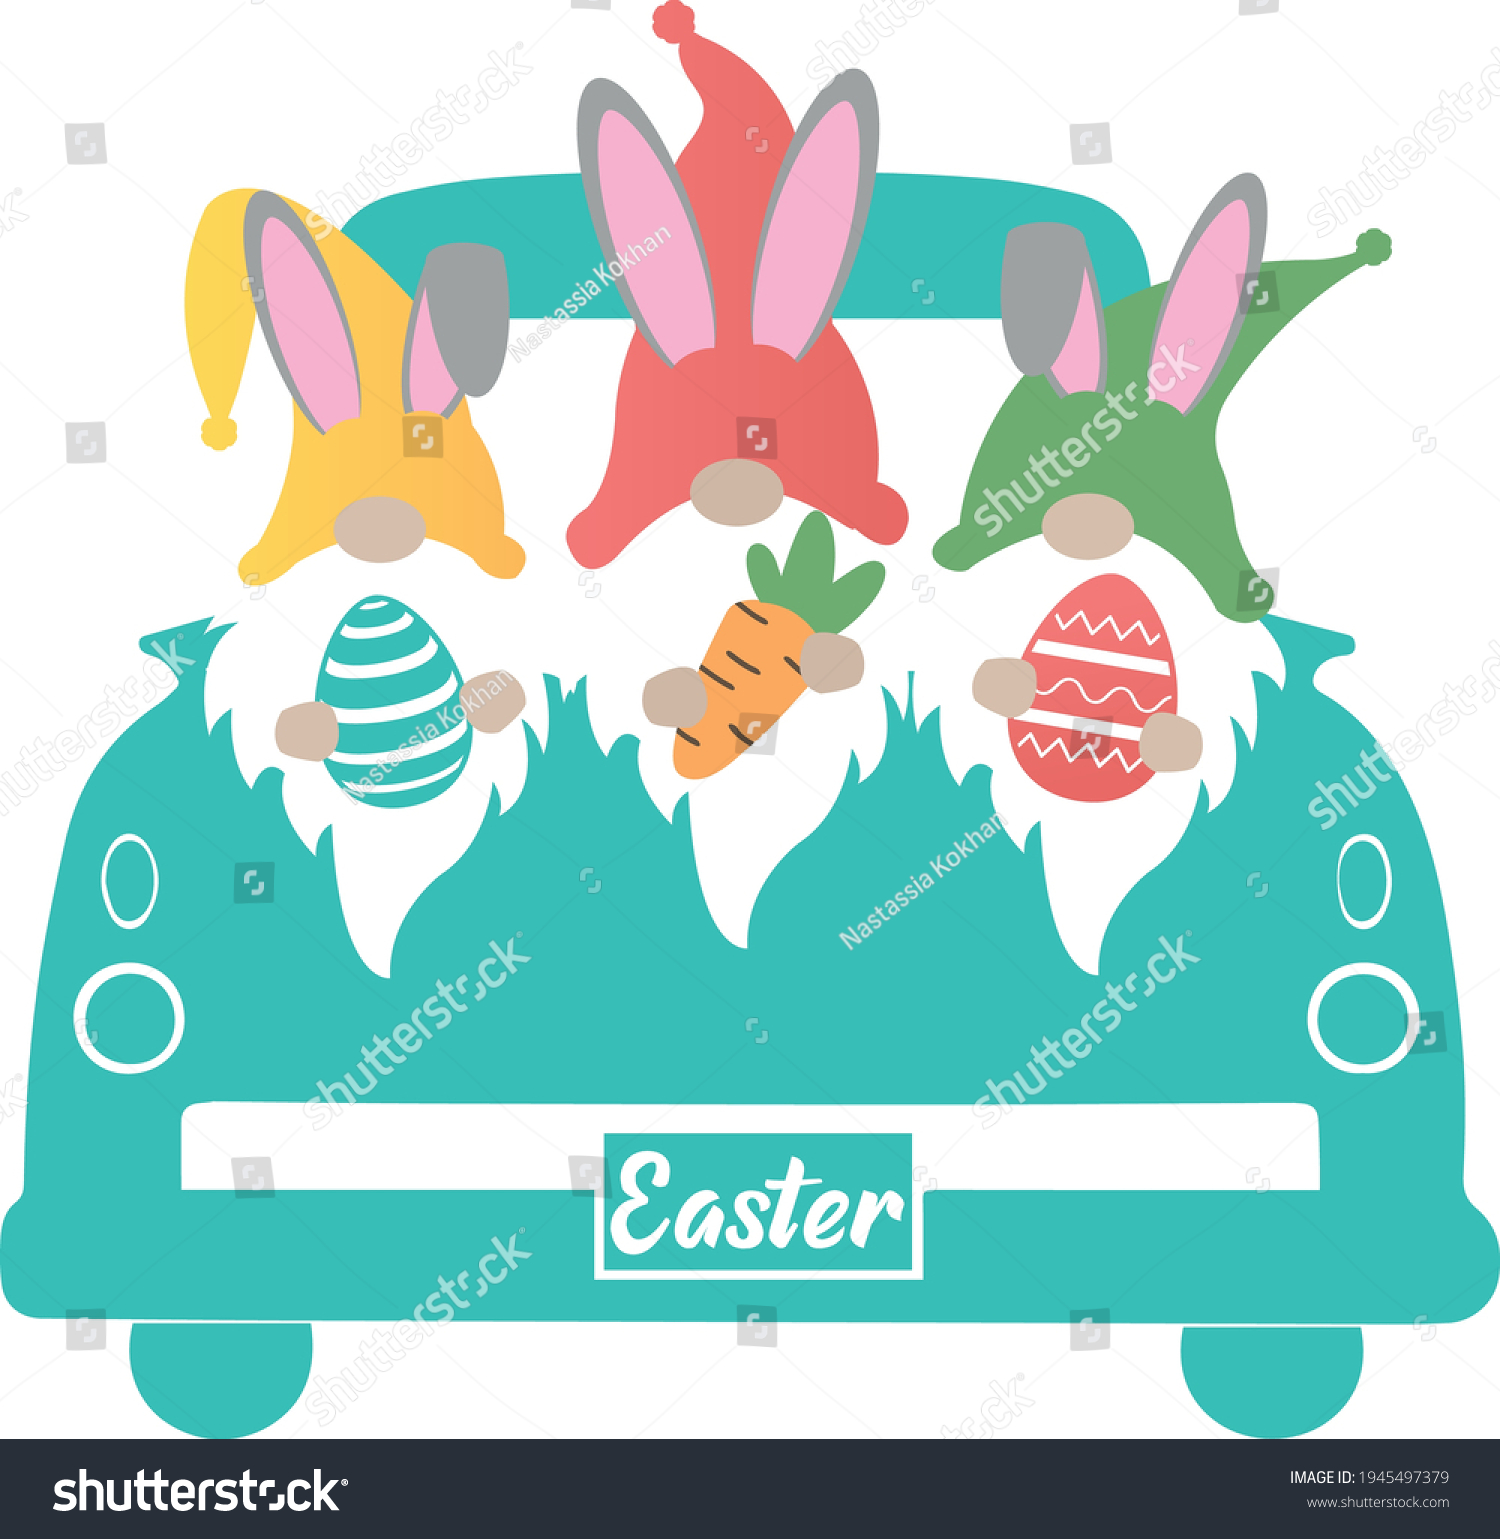 SVG of Easter Truck Svg vector Illustration isolated on white background. Easter Truck with easter gnome for Cricut and Silhouette. Vintage truck for design shirt and scrapbooking.Easter gnome image svg